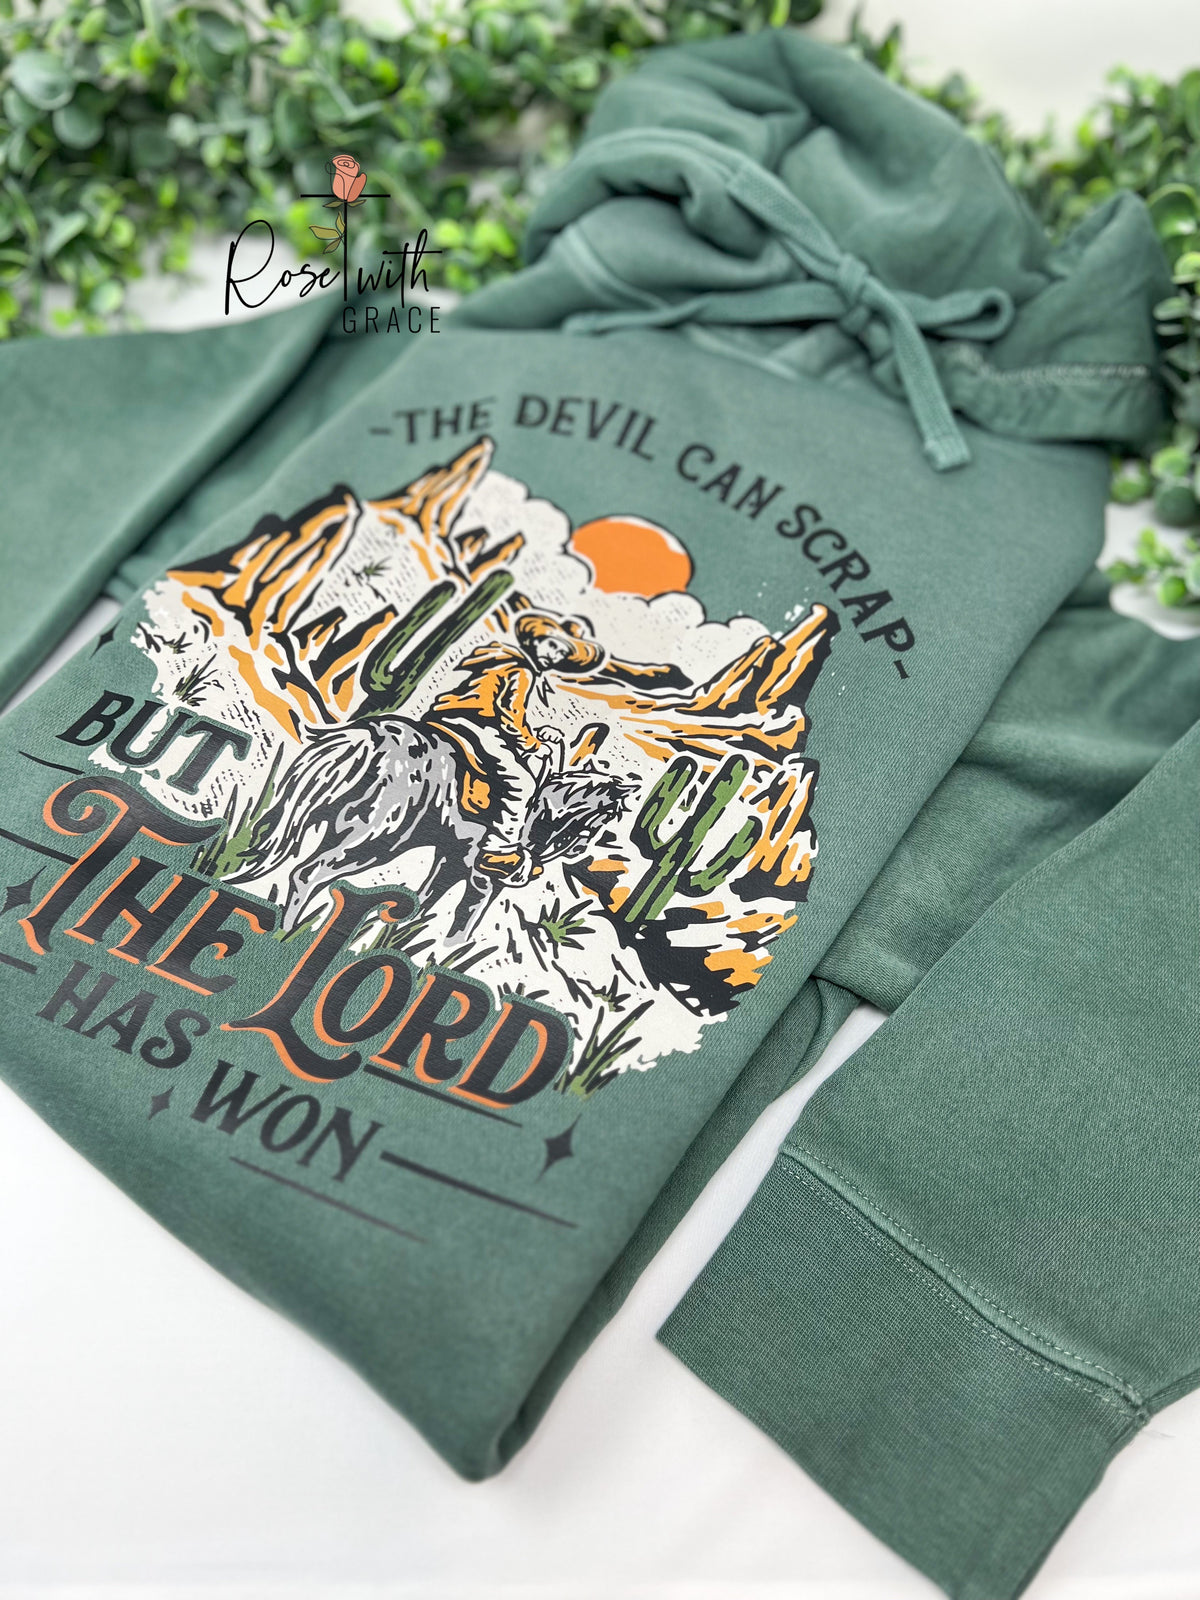 The Lord Has Won - Independent Trading Co Hoodie Rose with Grace LLC